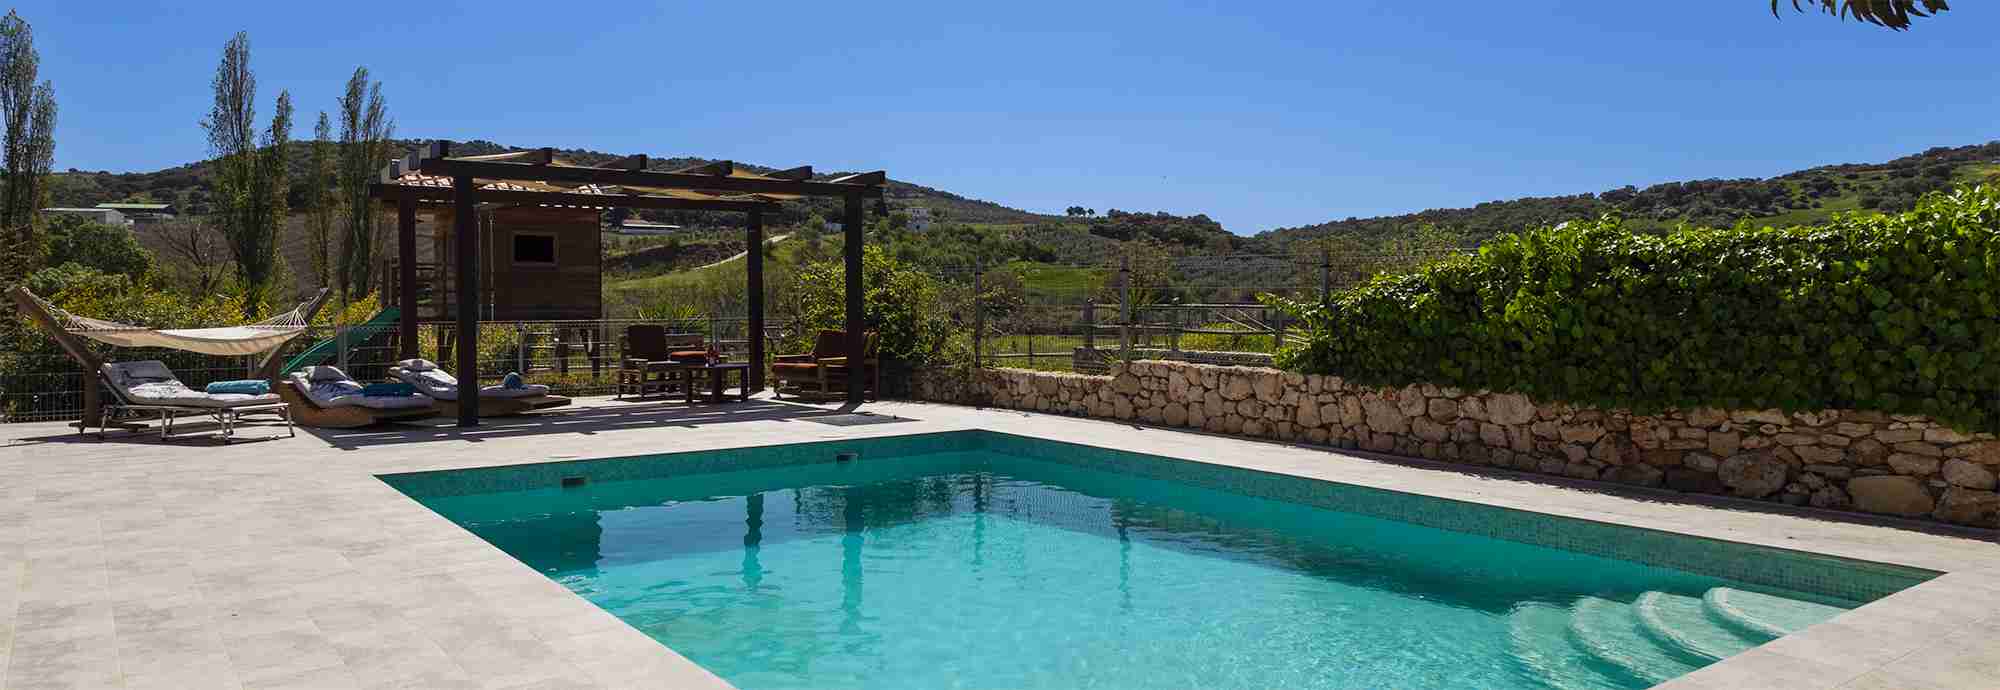 Family home in private location with fenced pool in Andalusian countryside